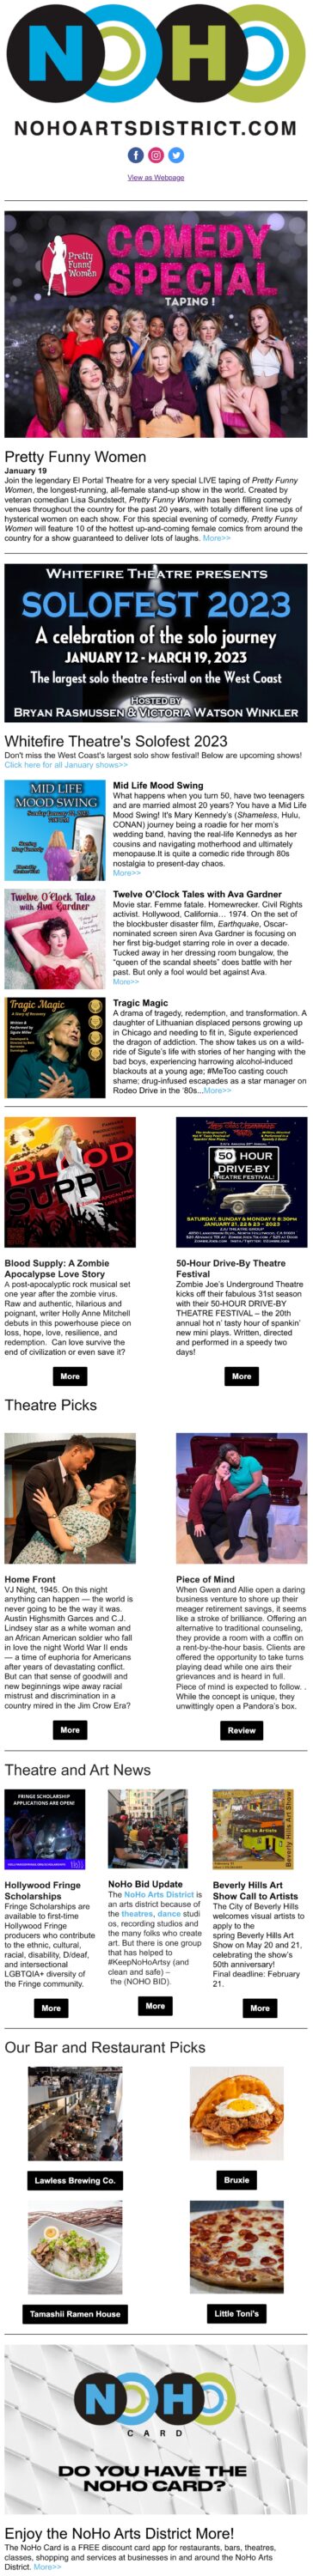 NoHo News: Pretty Funny Women. Mid Life Mood Swing. Tragic Magic. Solofest 2023. Blood Supply. 50-Hour Drive-By Theatre Festival. Call to Artists. #KeepNoHoArtsy
